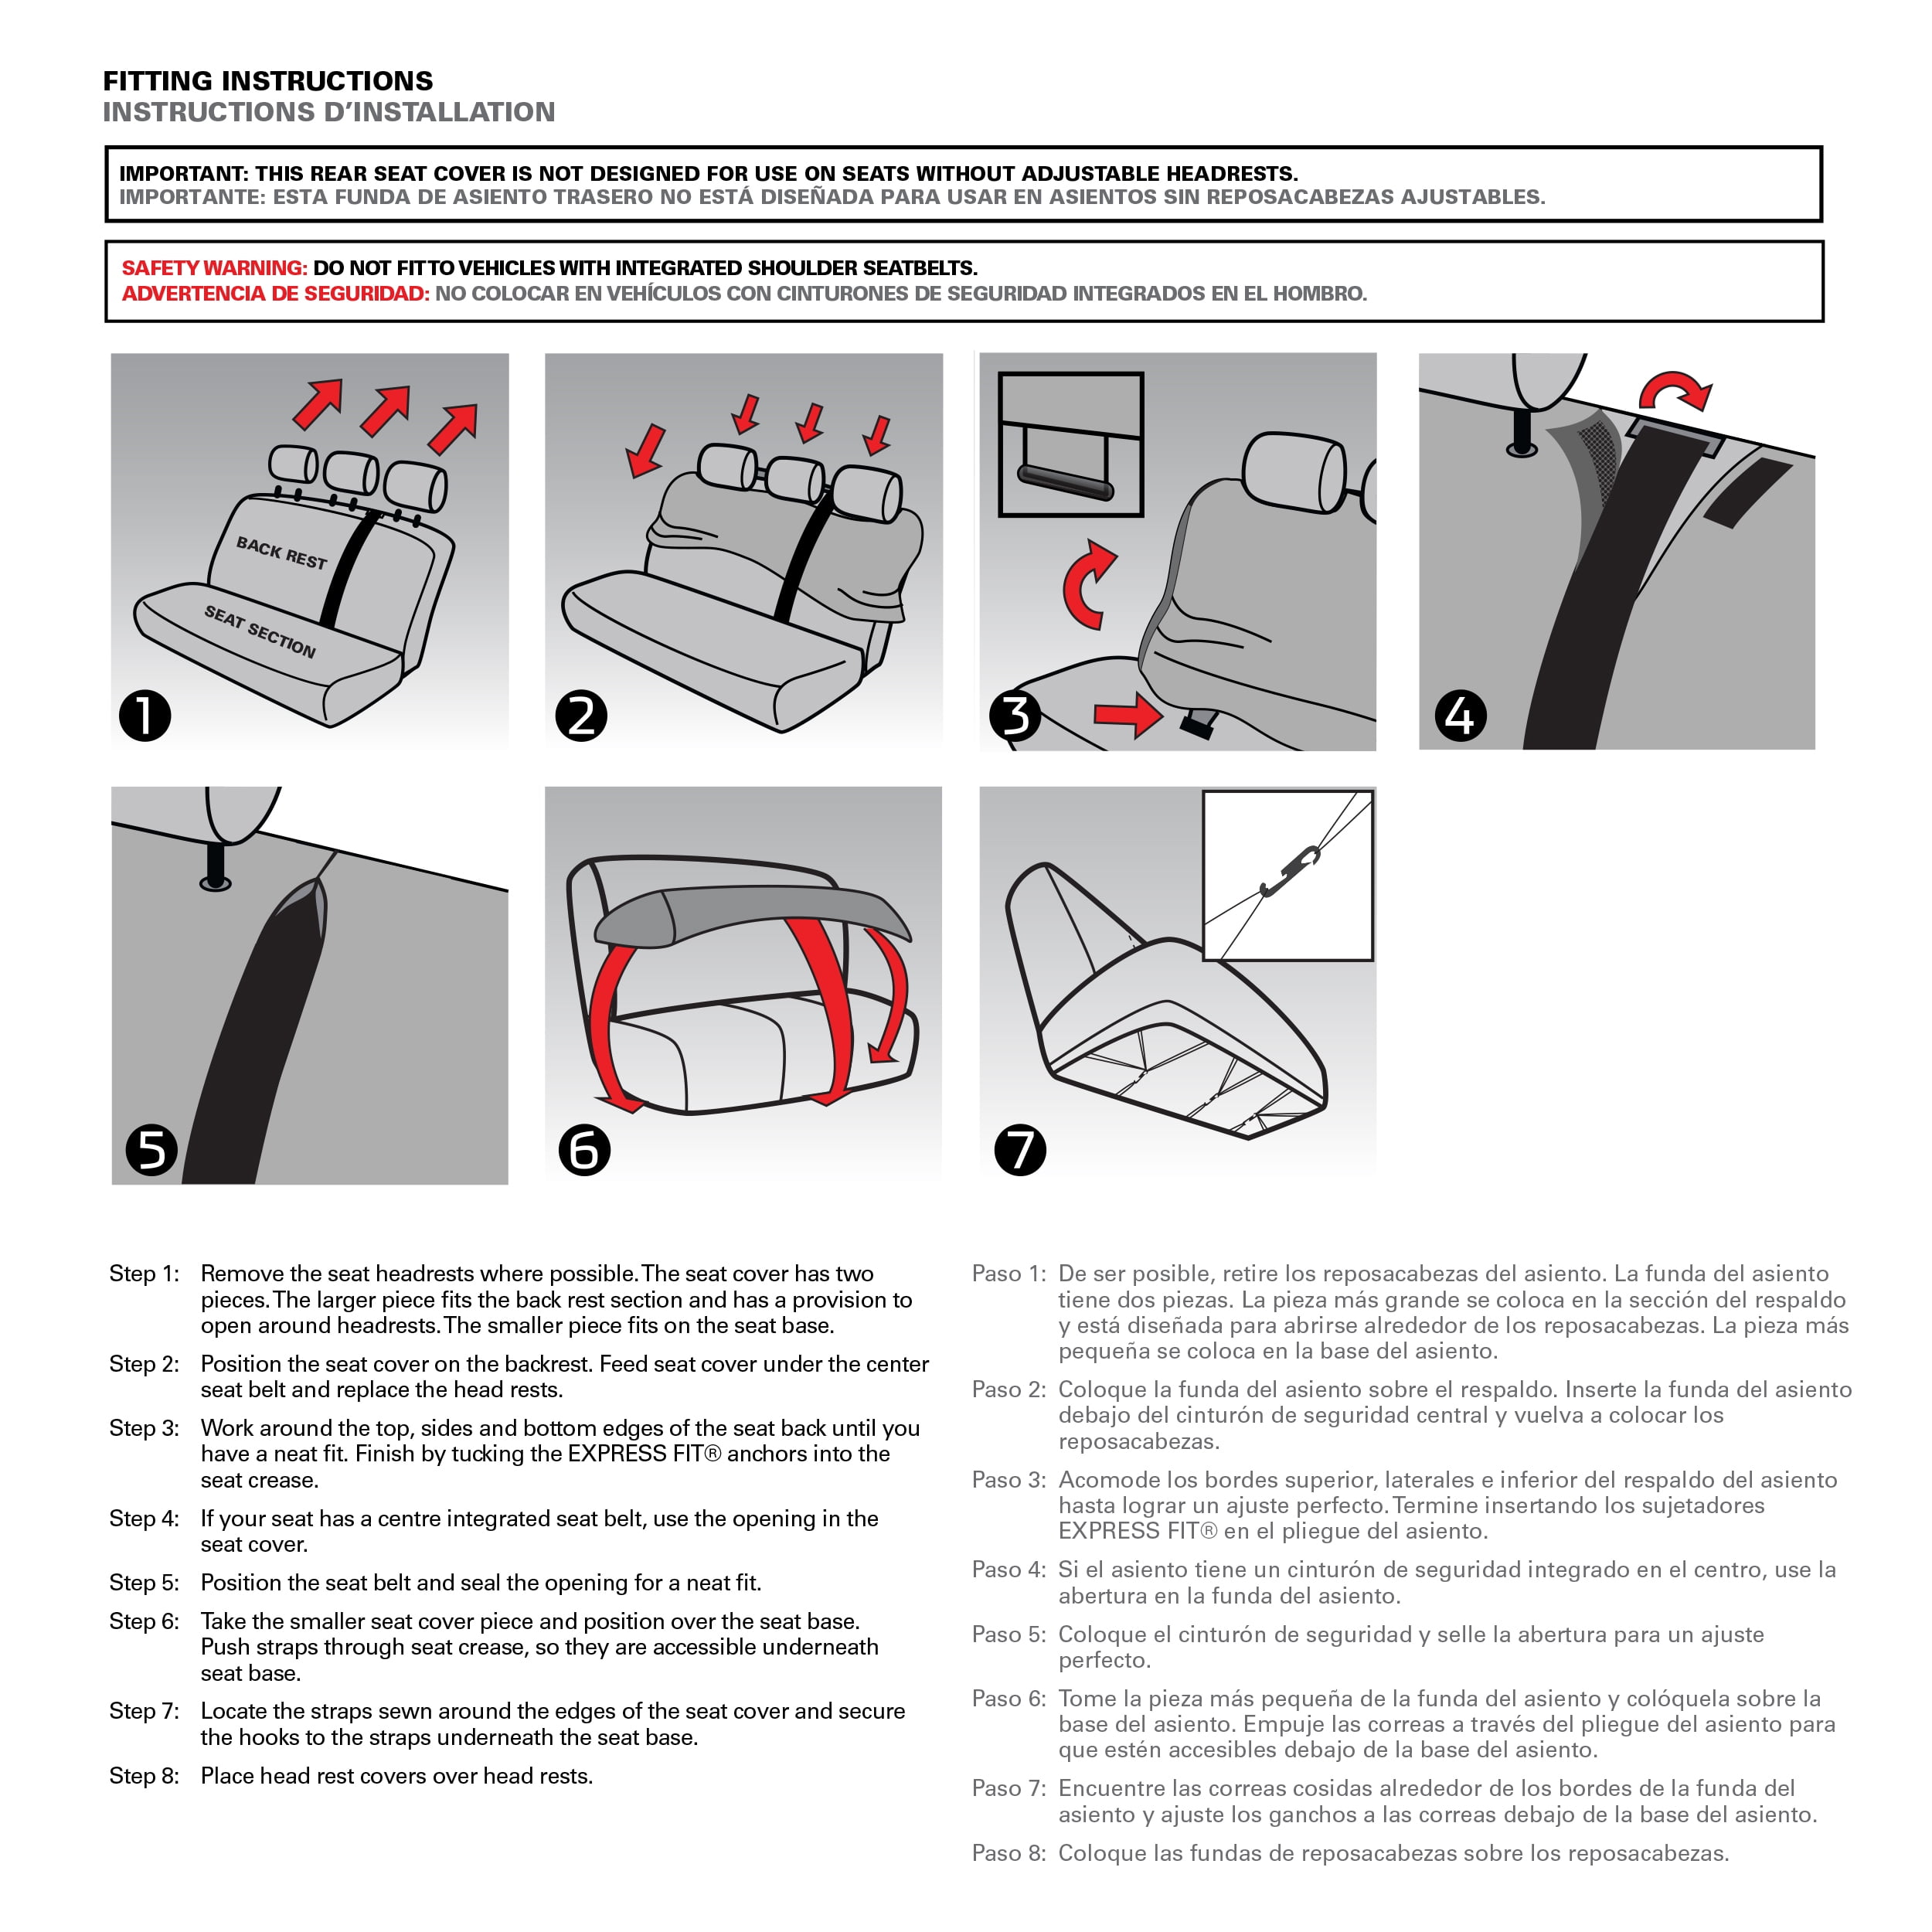 Repco's Rear Car Seat Covers Fitting Guide 